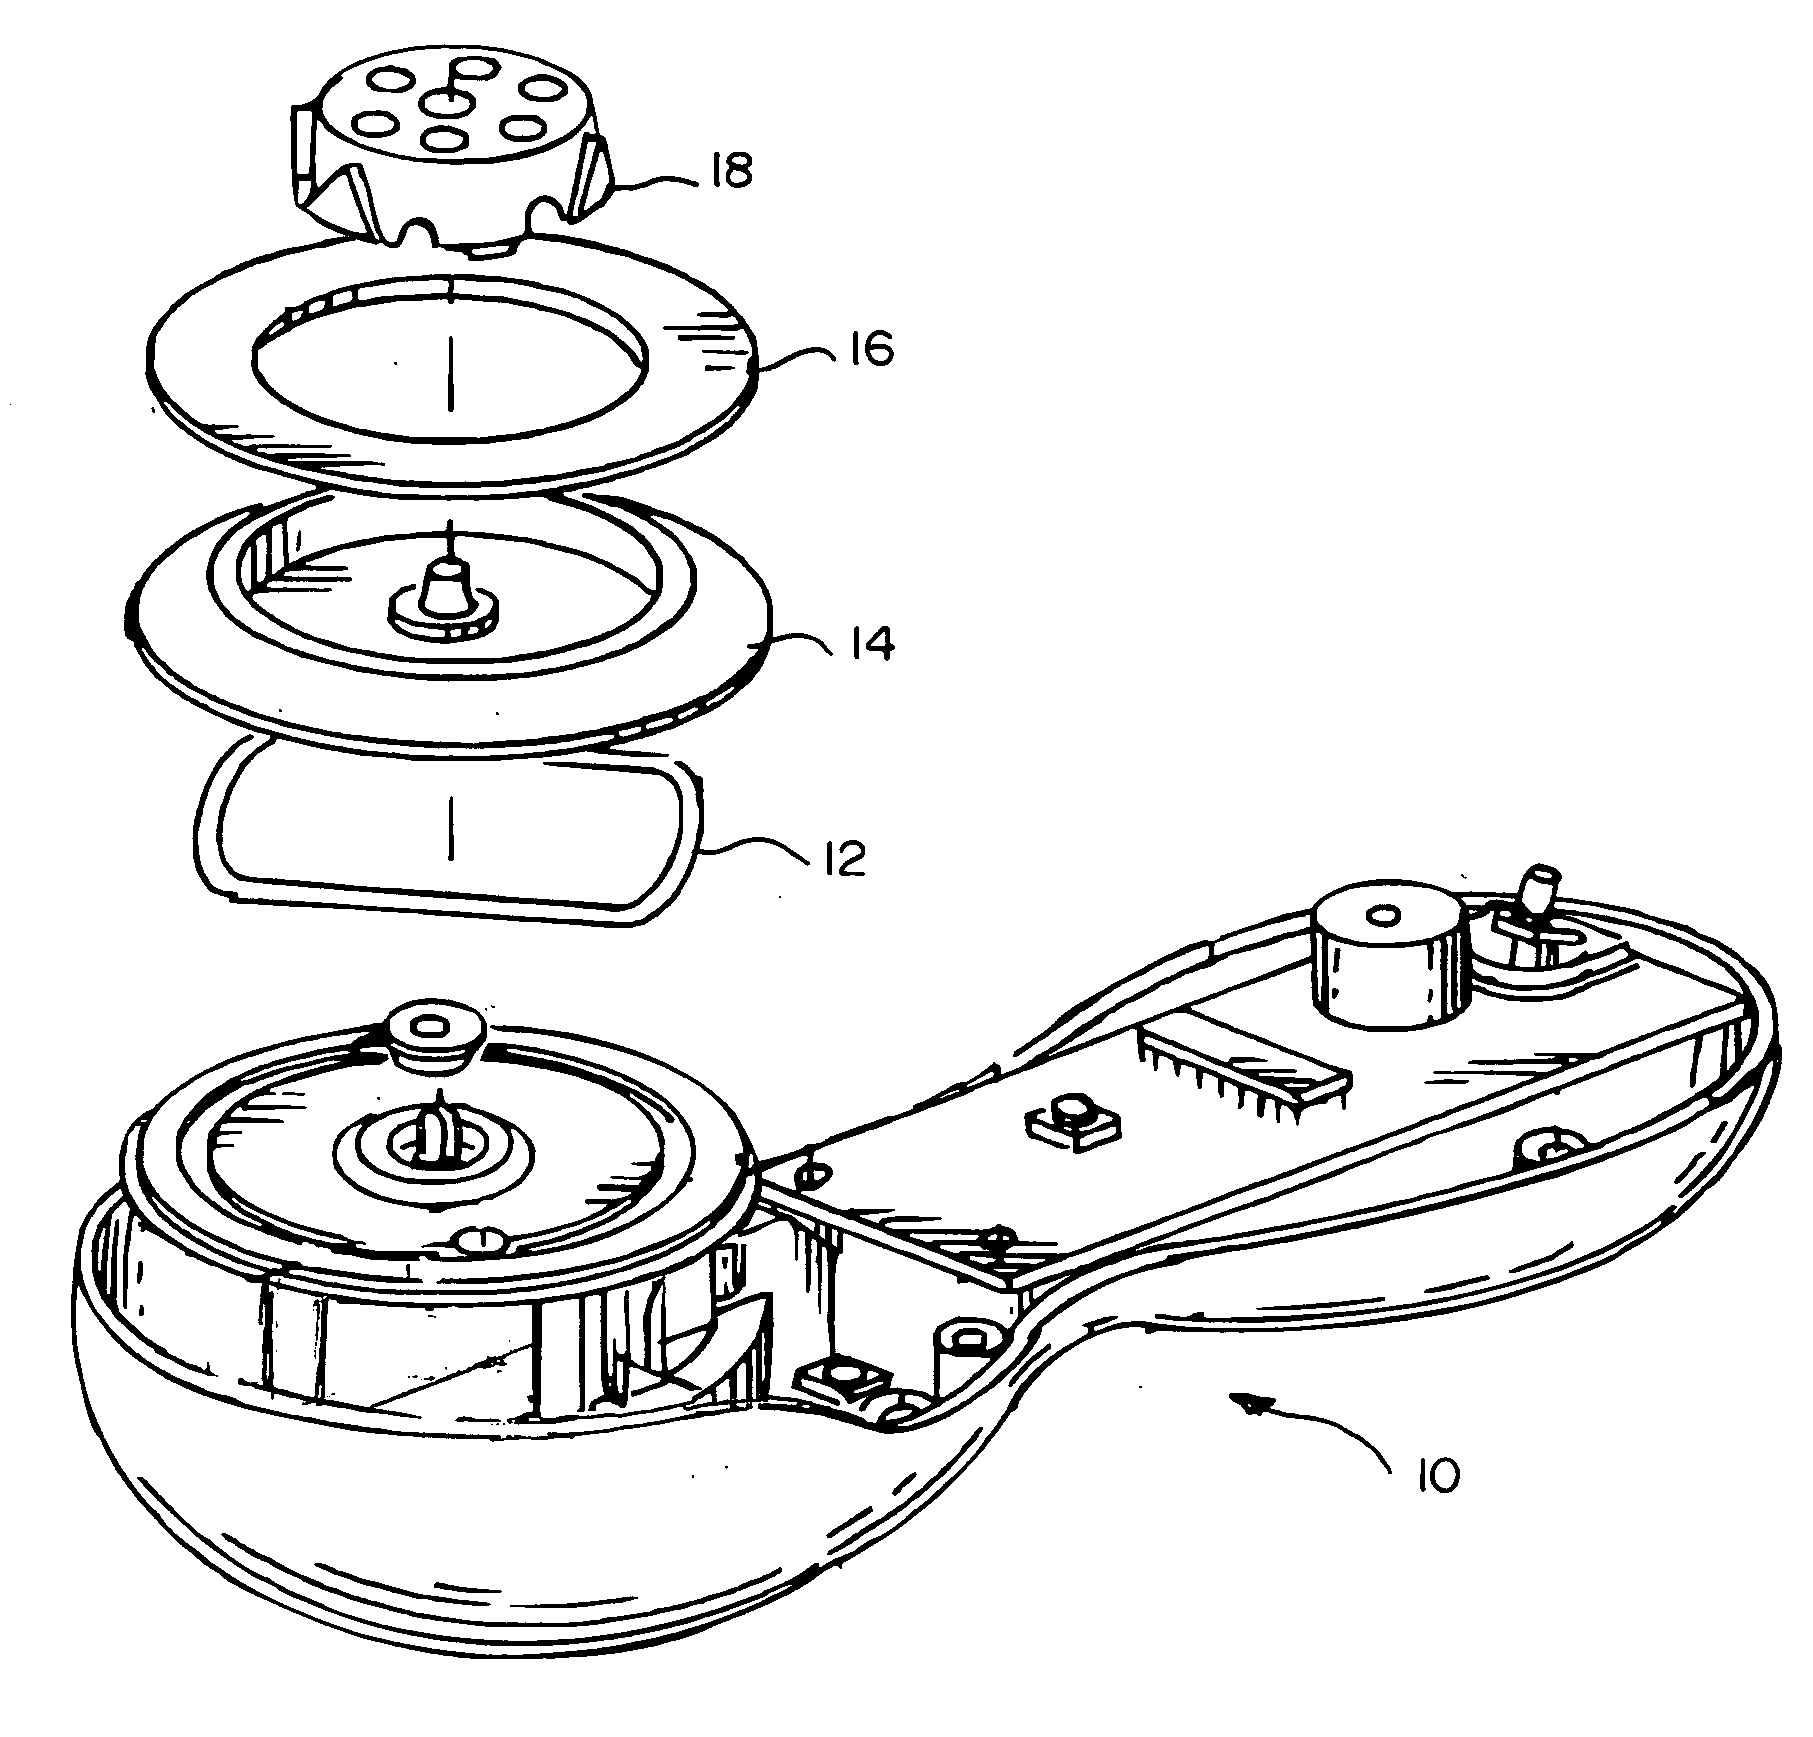 Oscillating brushhead attachment system for a personal care appliance